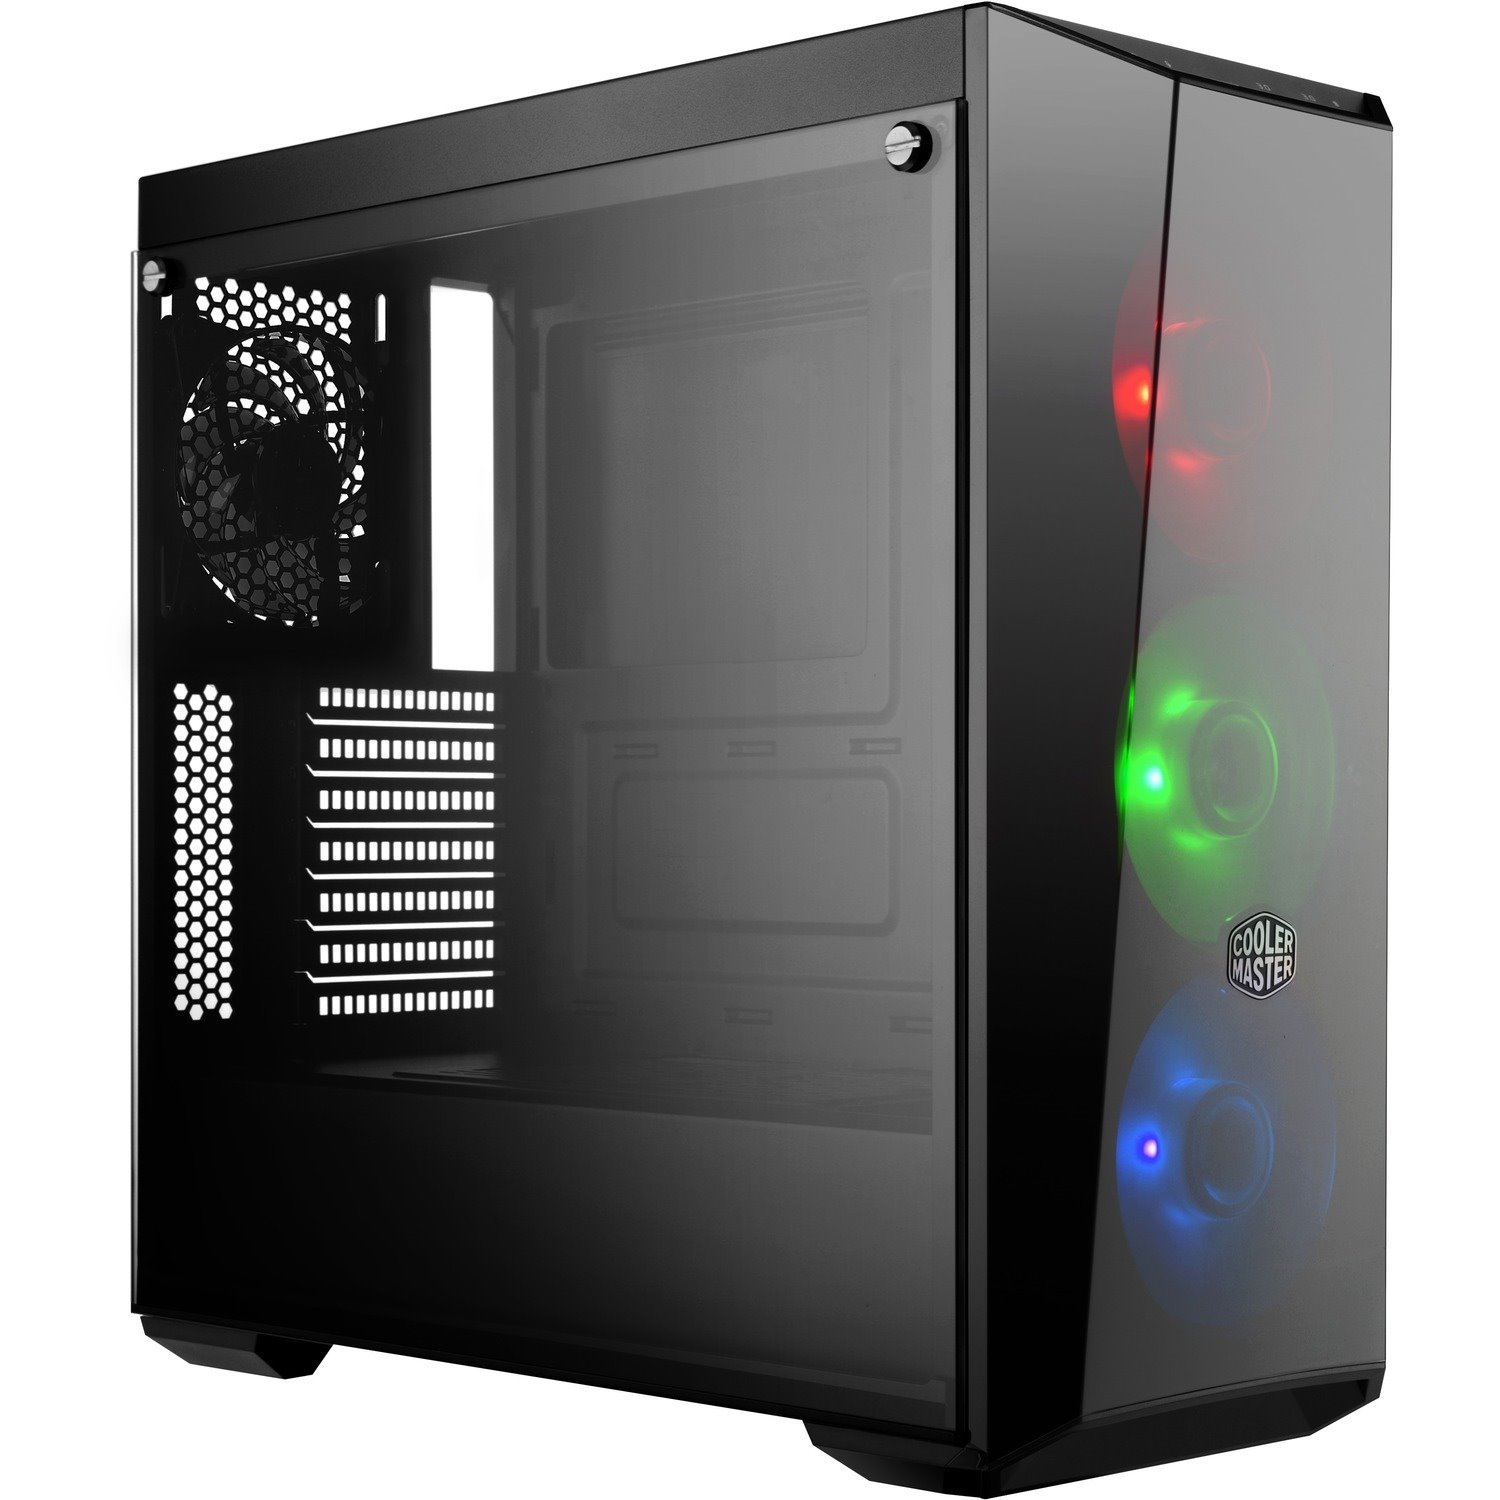 Cooler Master MasterBox Lite 5 MCW-L5S3-KGNN-02 Computer Case - ATX Motherboard Supported - Mid-tower - Steel, Plastic, Tempered Glass - Black